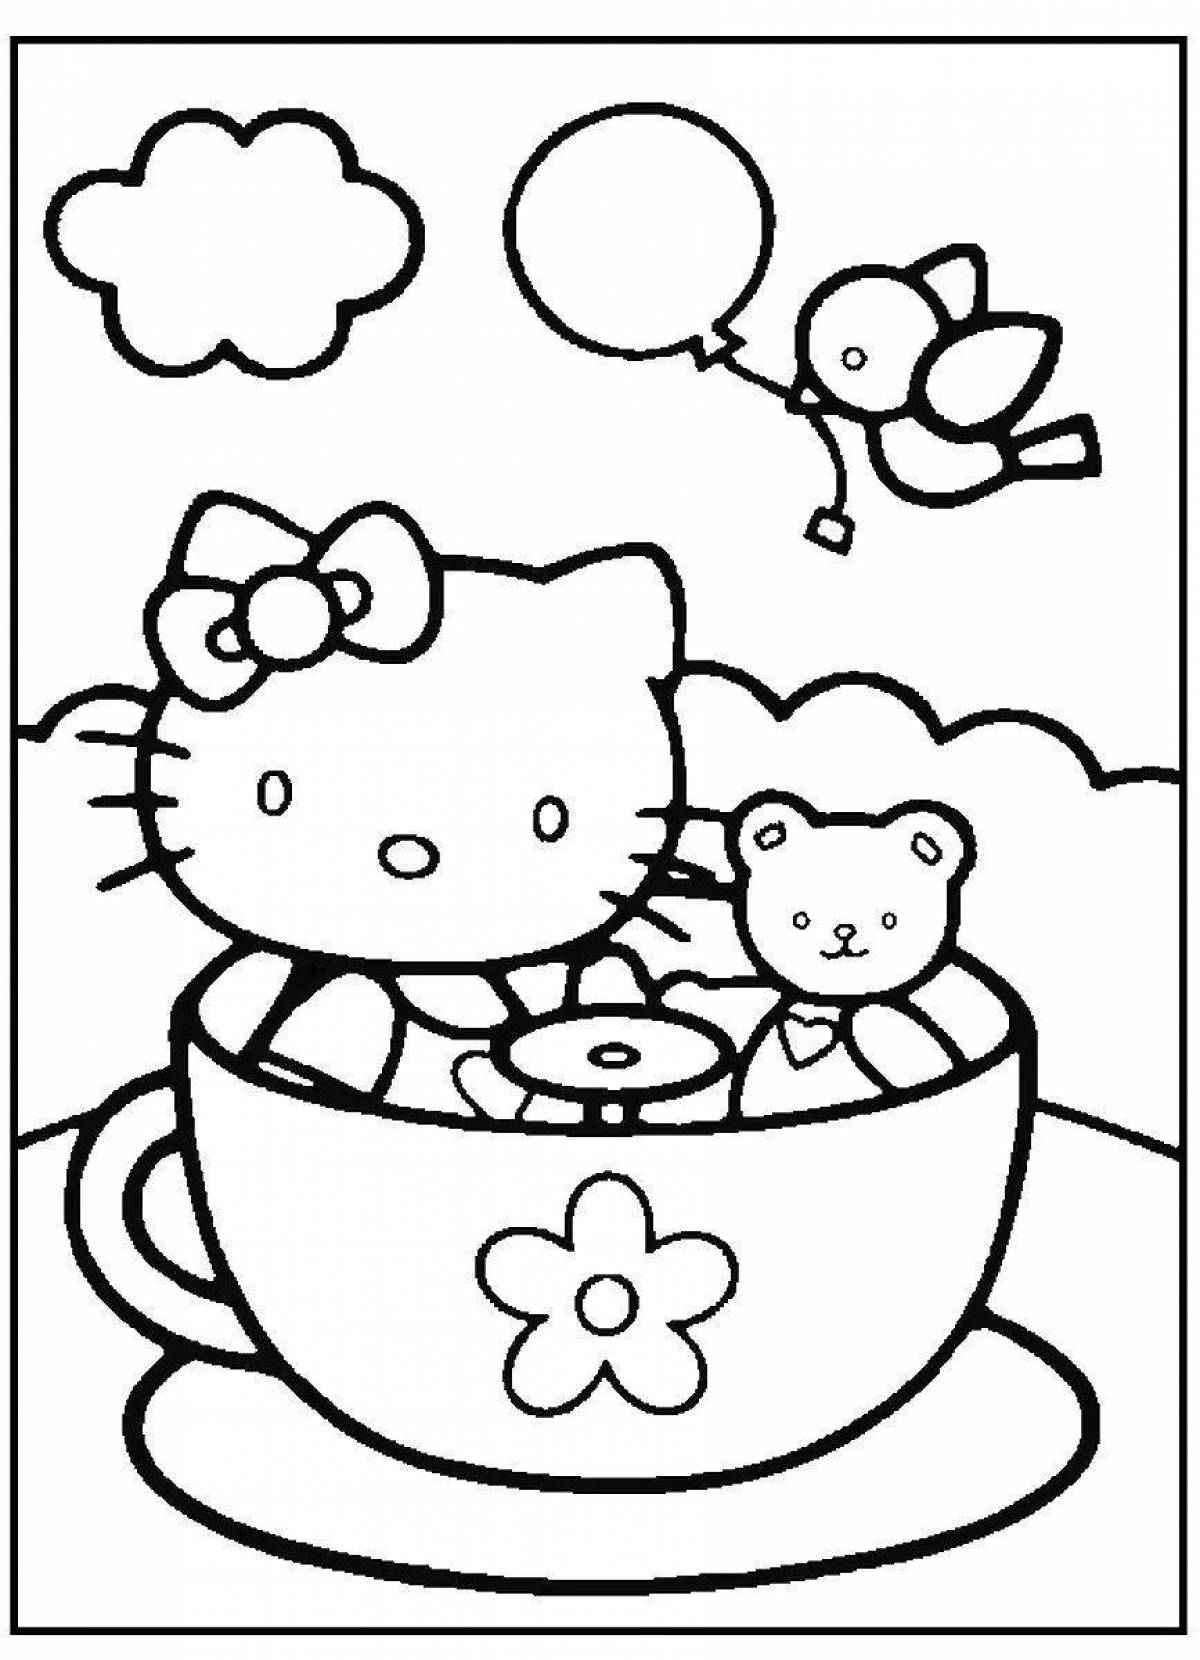 Curious kitten in a mug coloring book